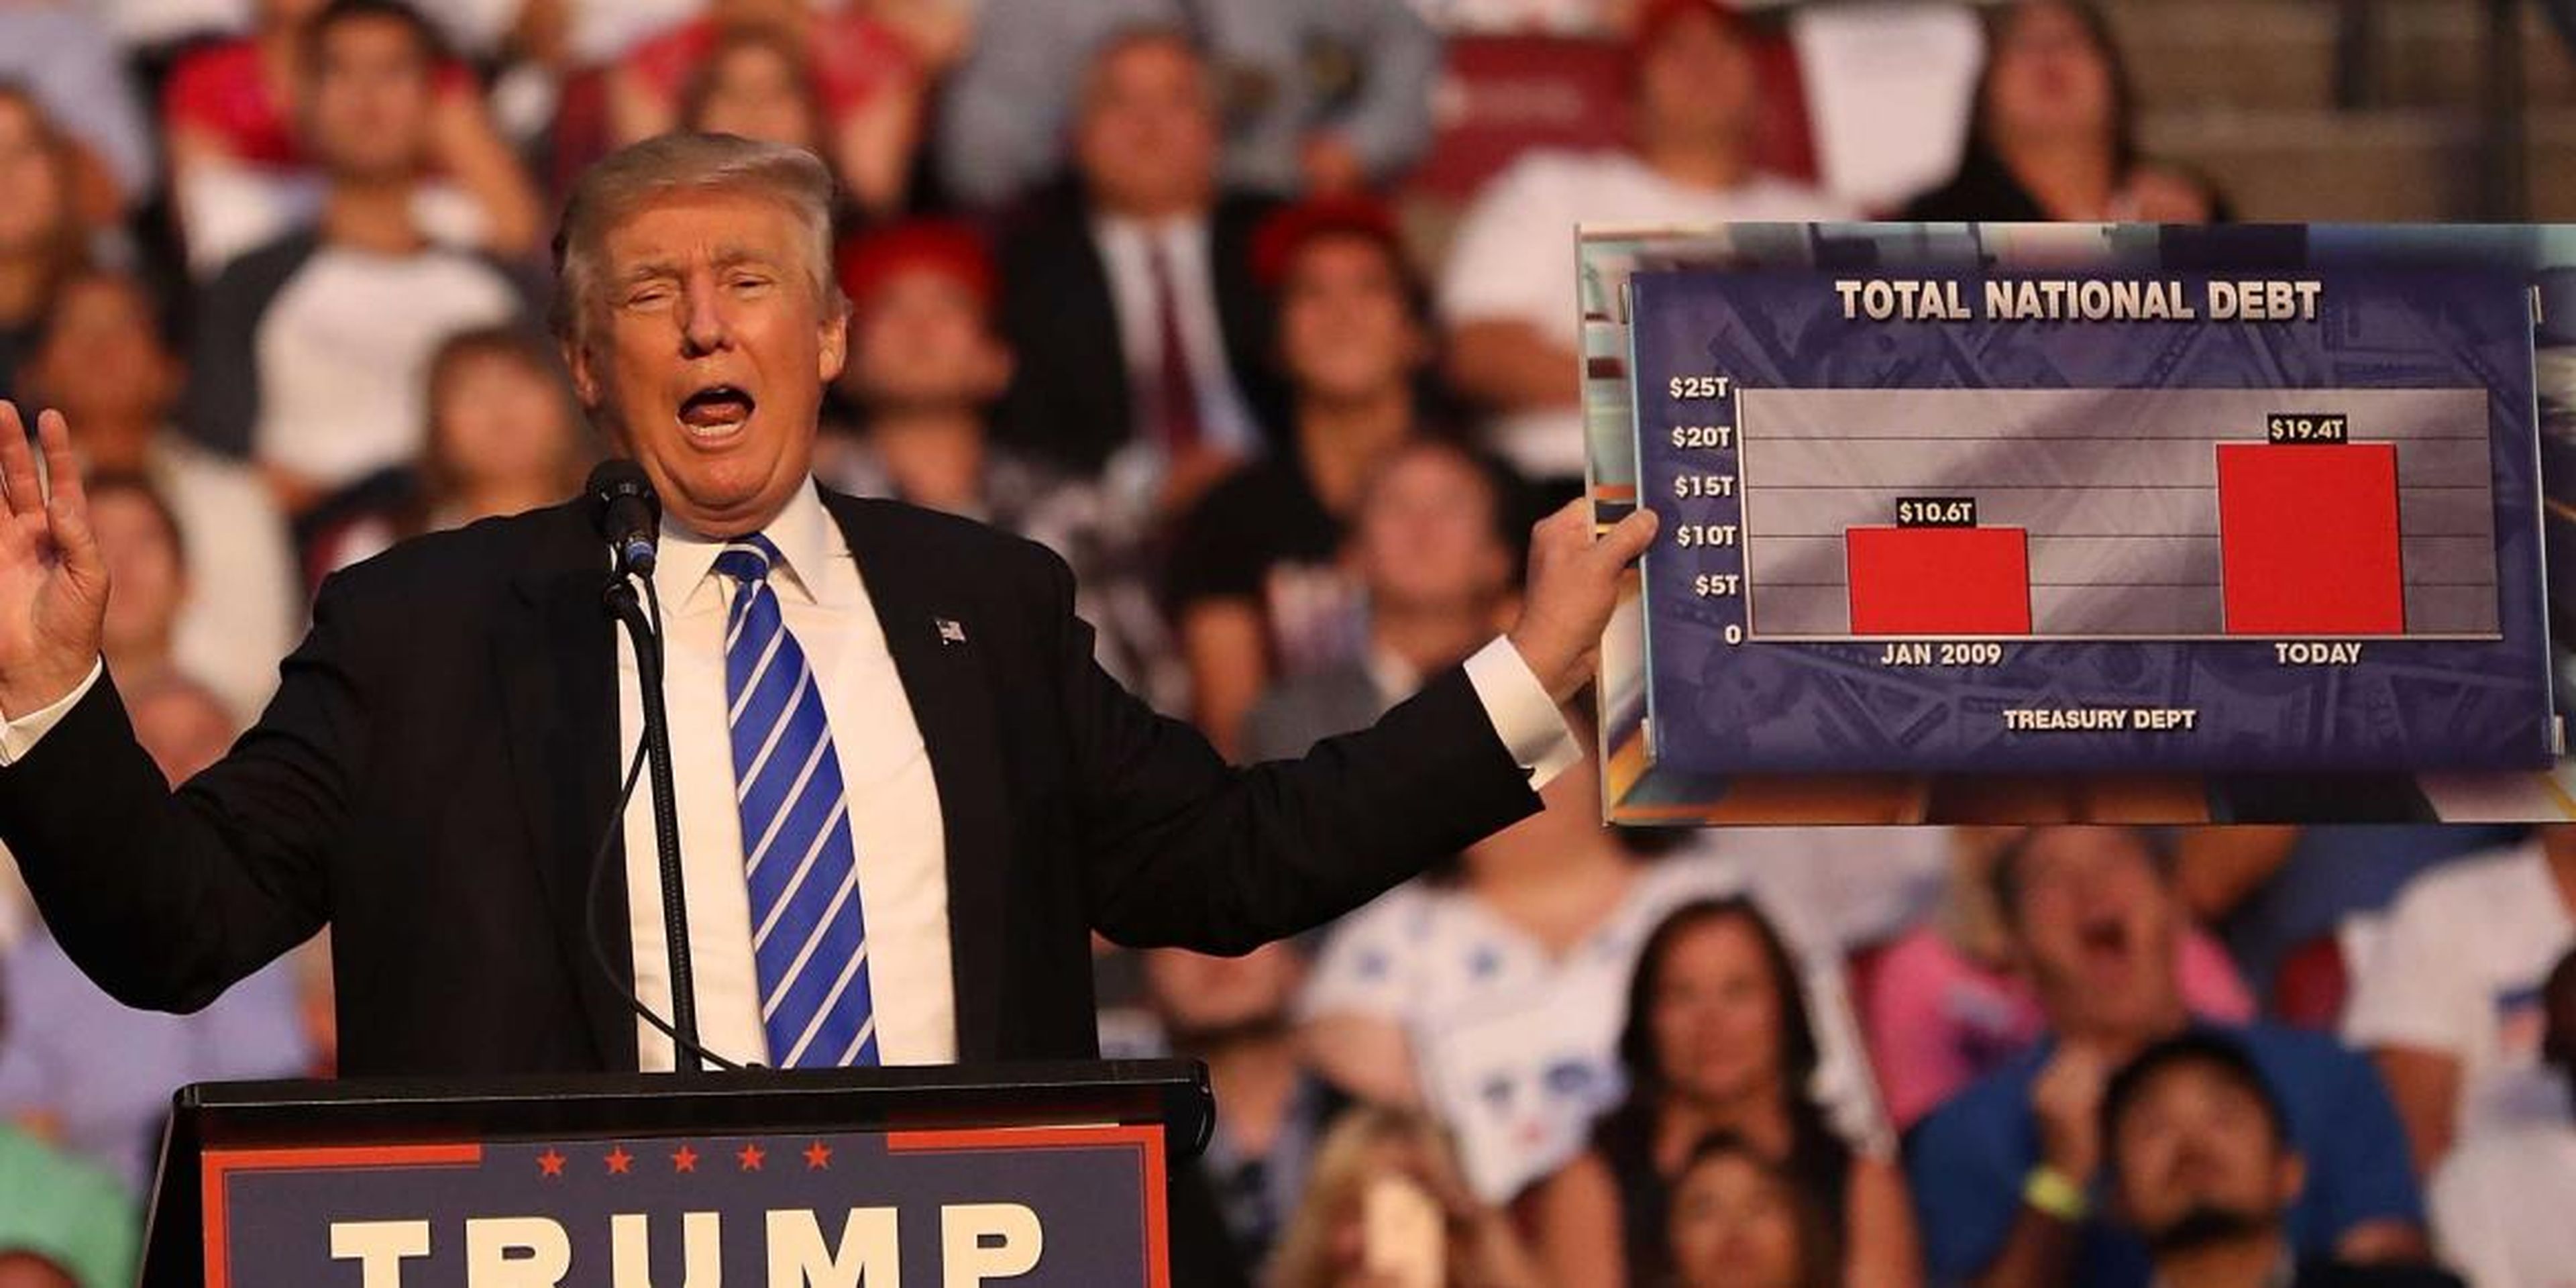 President Donald Trump holds up a chart showing the US national debt during a campaign rally in 2016.